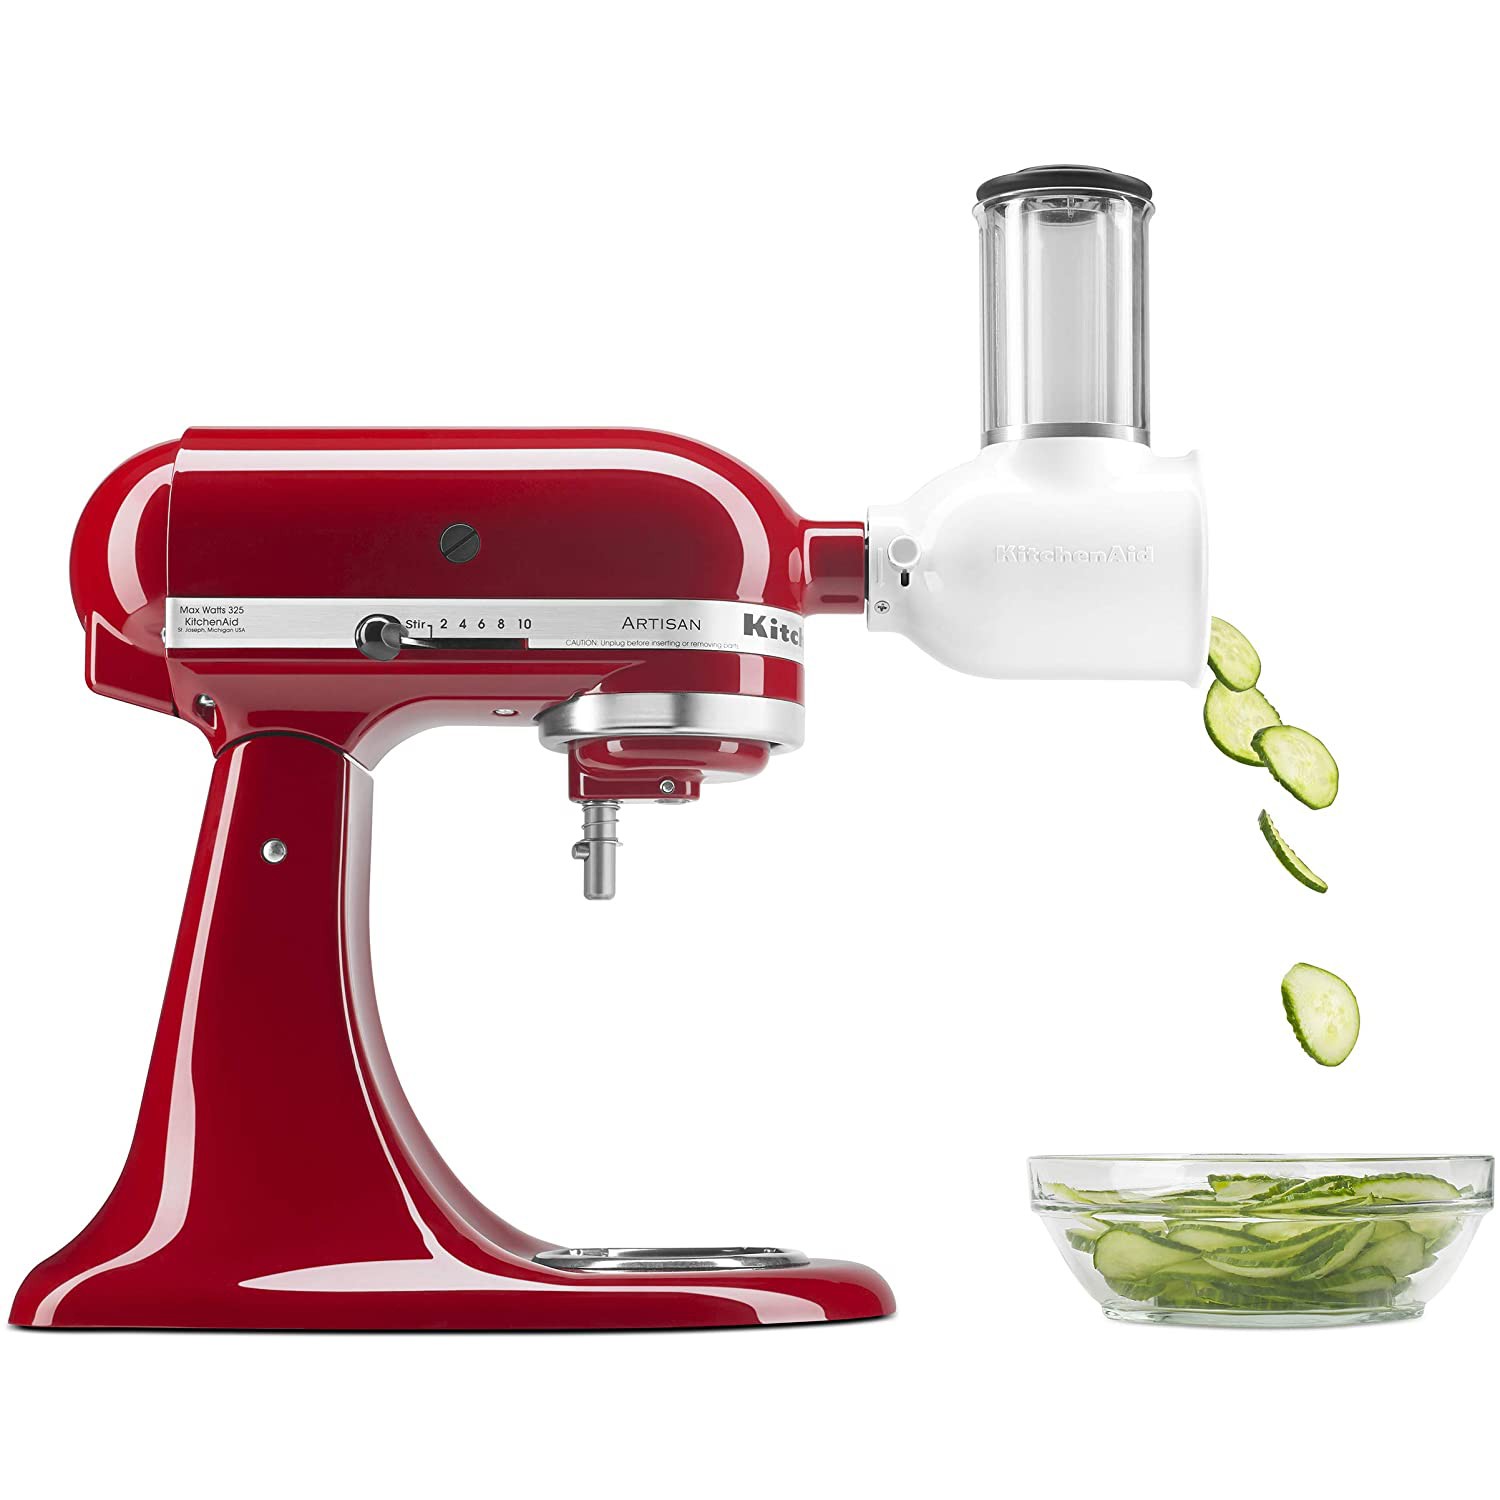 https://video-images.vice.com//products/61806e6dd57a5d00930e0046/gallery-image/1635806829896-kitchenaid-fresh-slicer-attachment.jpeg?crop=1xw:0.5625xh;center,center